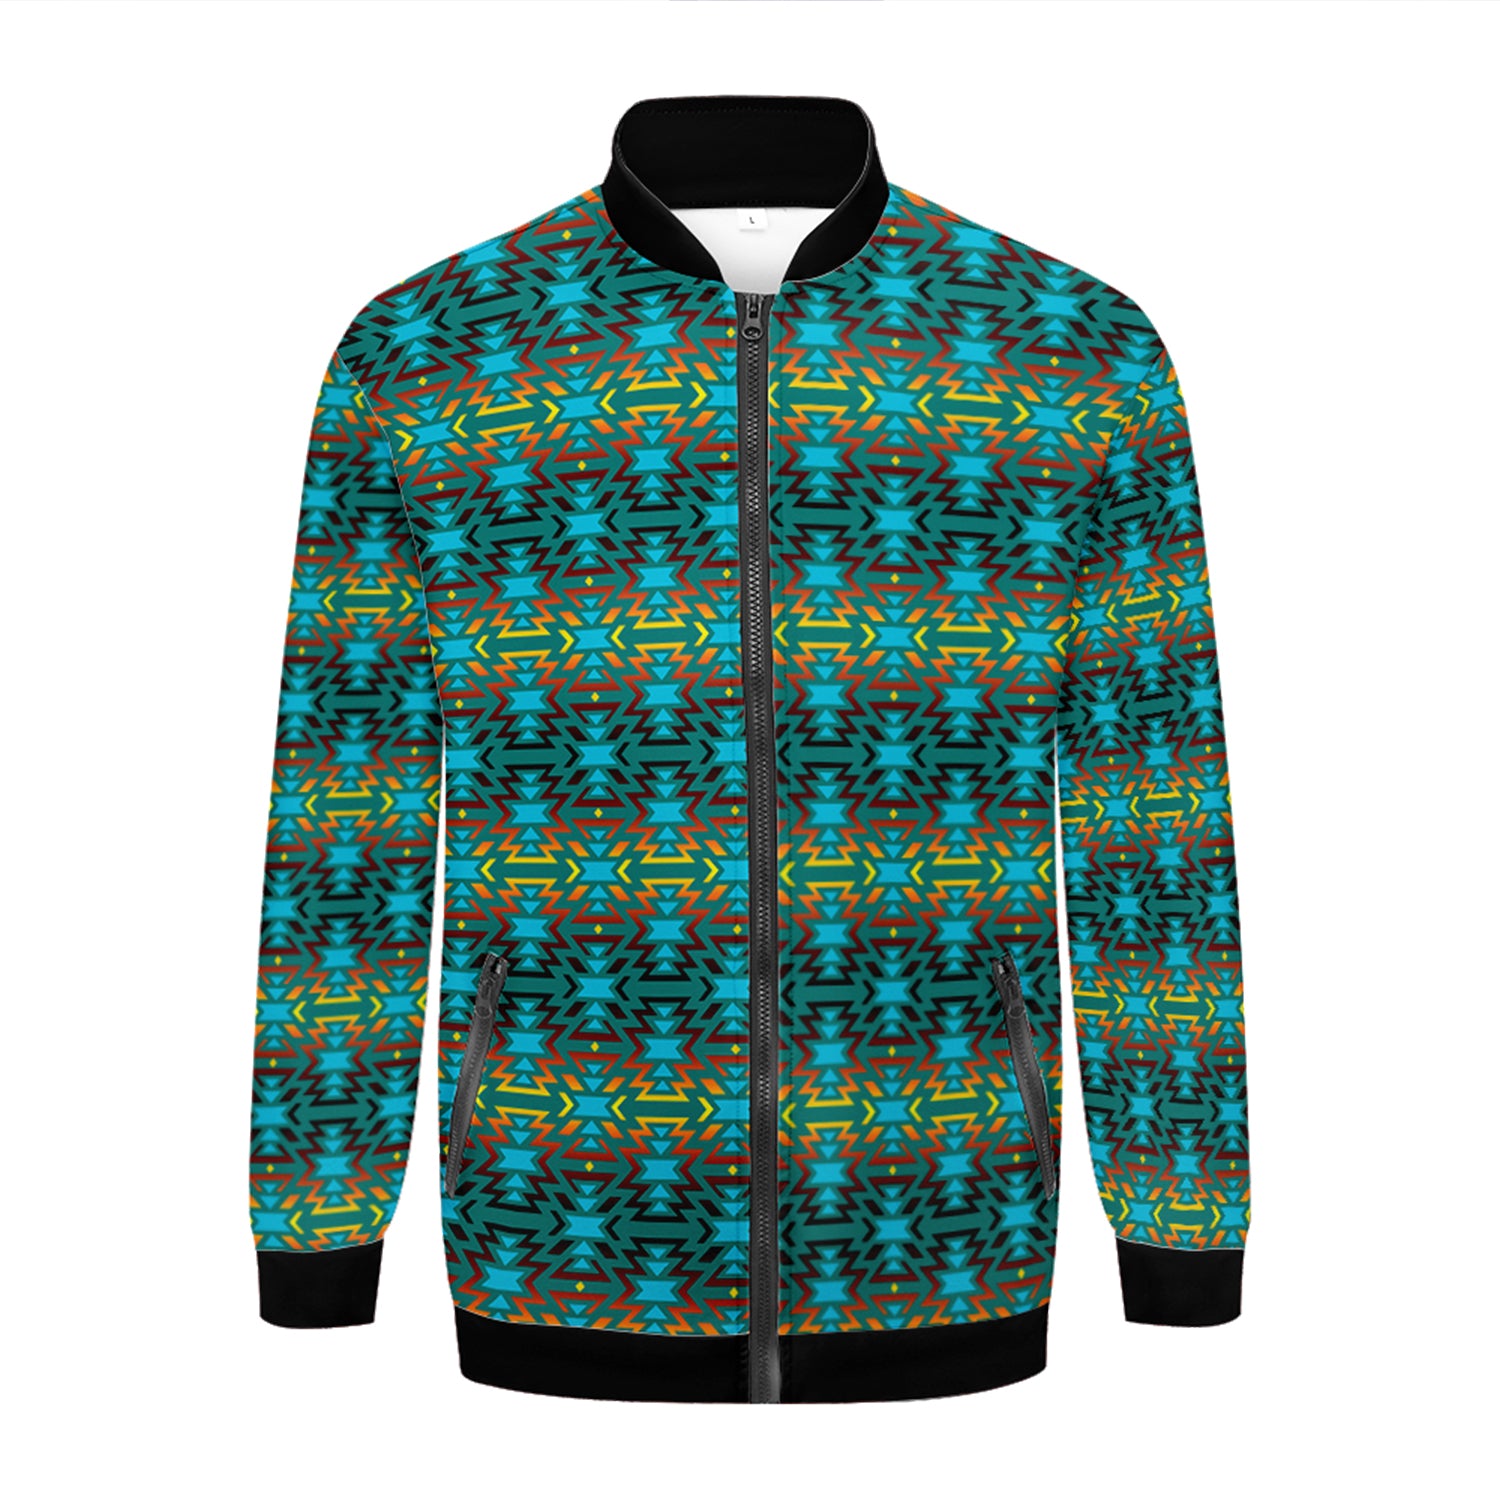 Fire Colors and Turquoise Teal Zippered Collared Lightweight Jacket